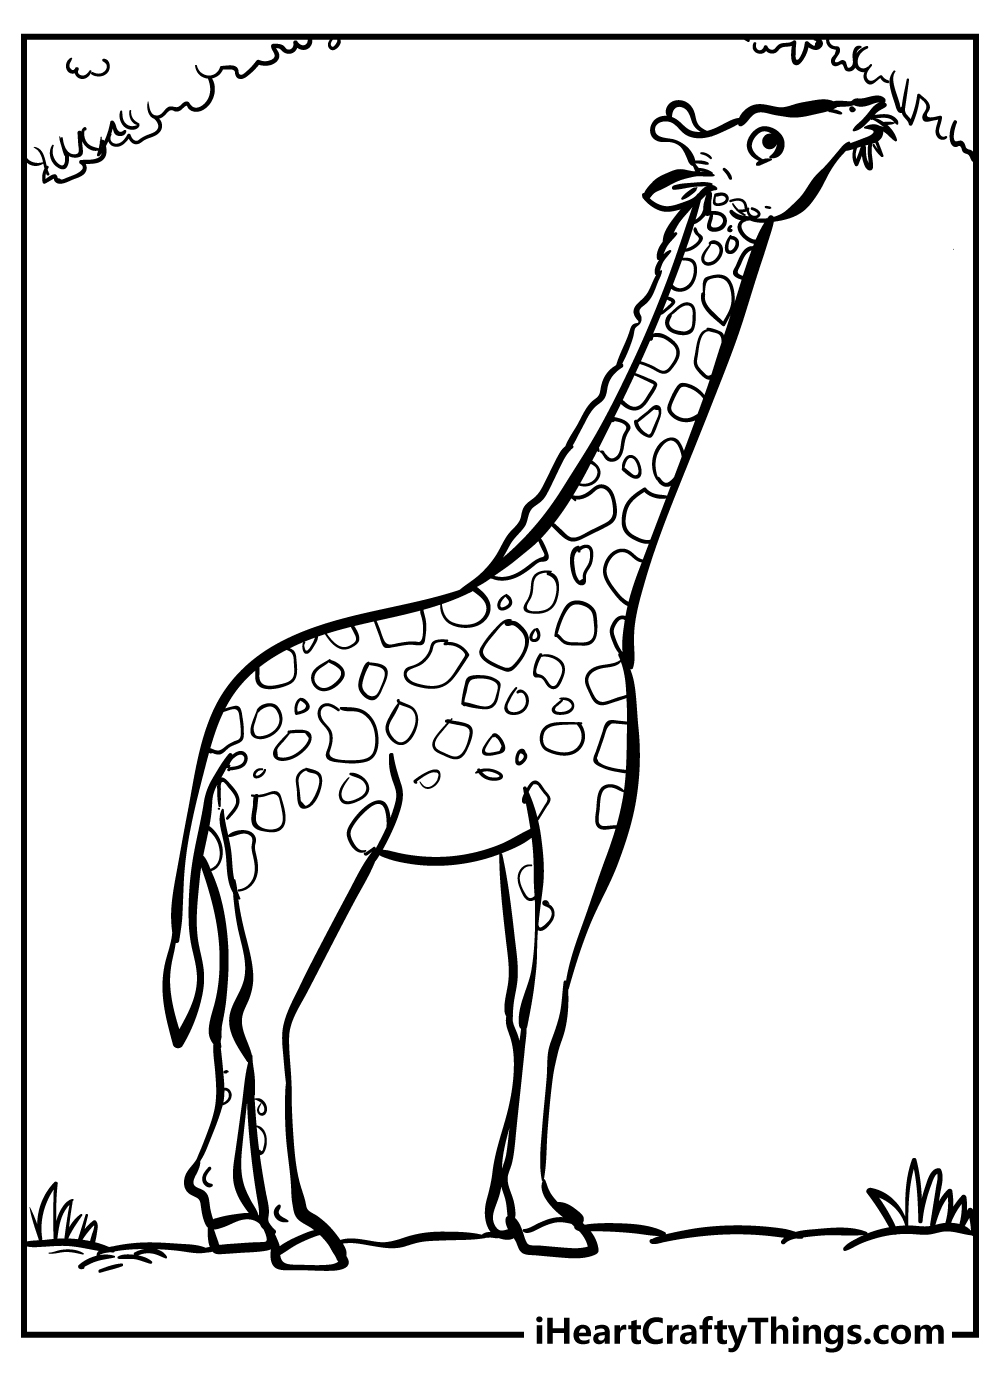 Giraffe coloring pages free printables